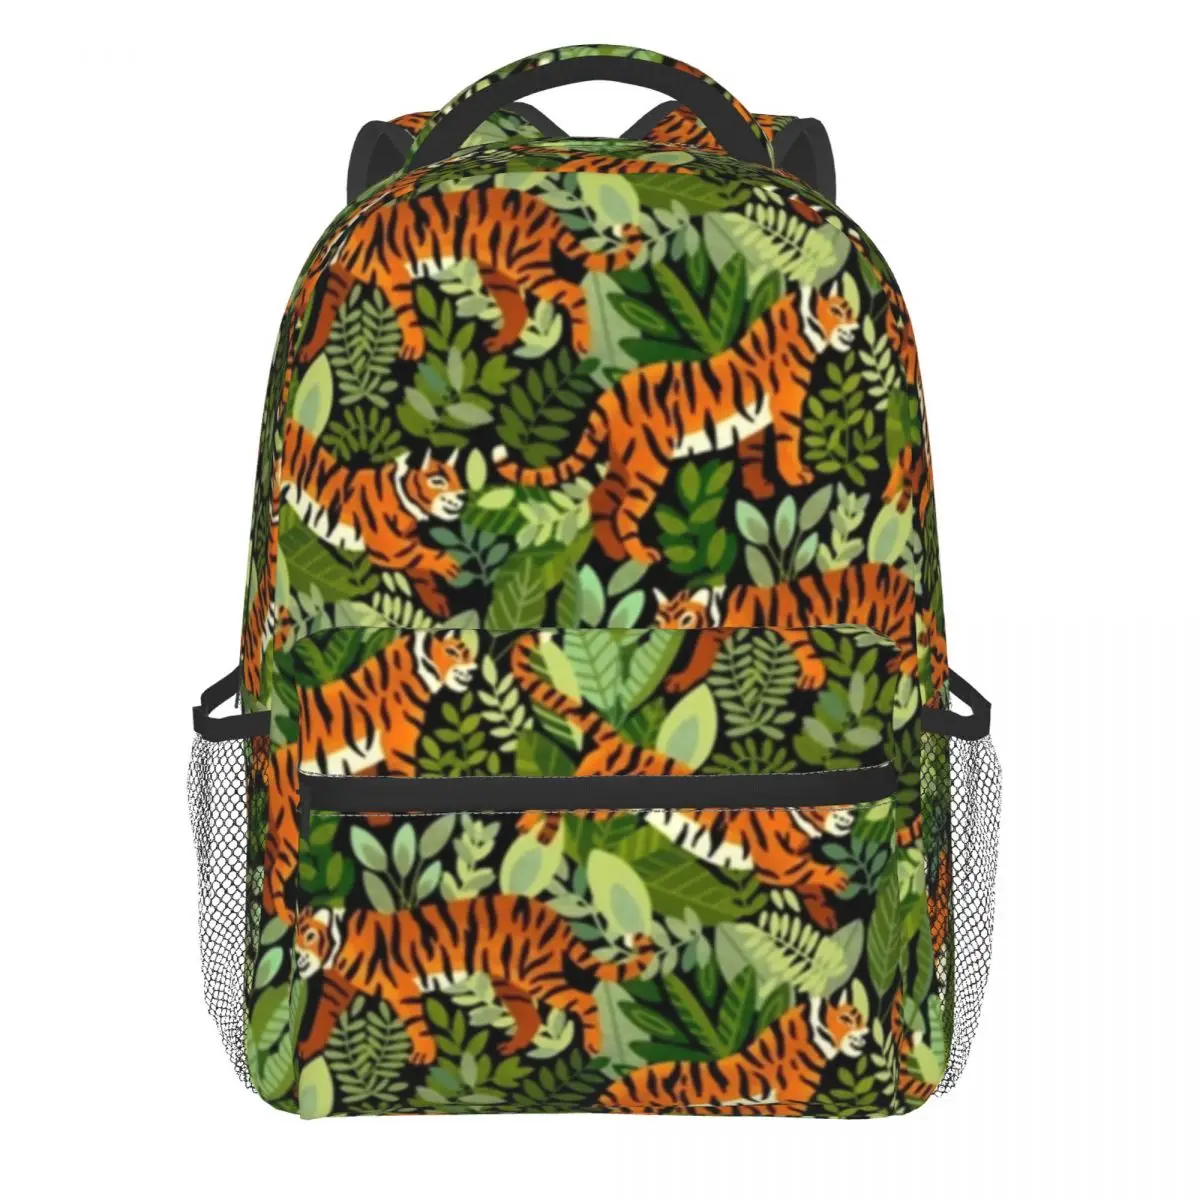 Bengal Tiger Backpack Green Jungle Print College Backpacks Gril High Quality Durable School Bags Fun Rucksack